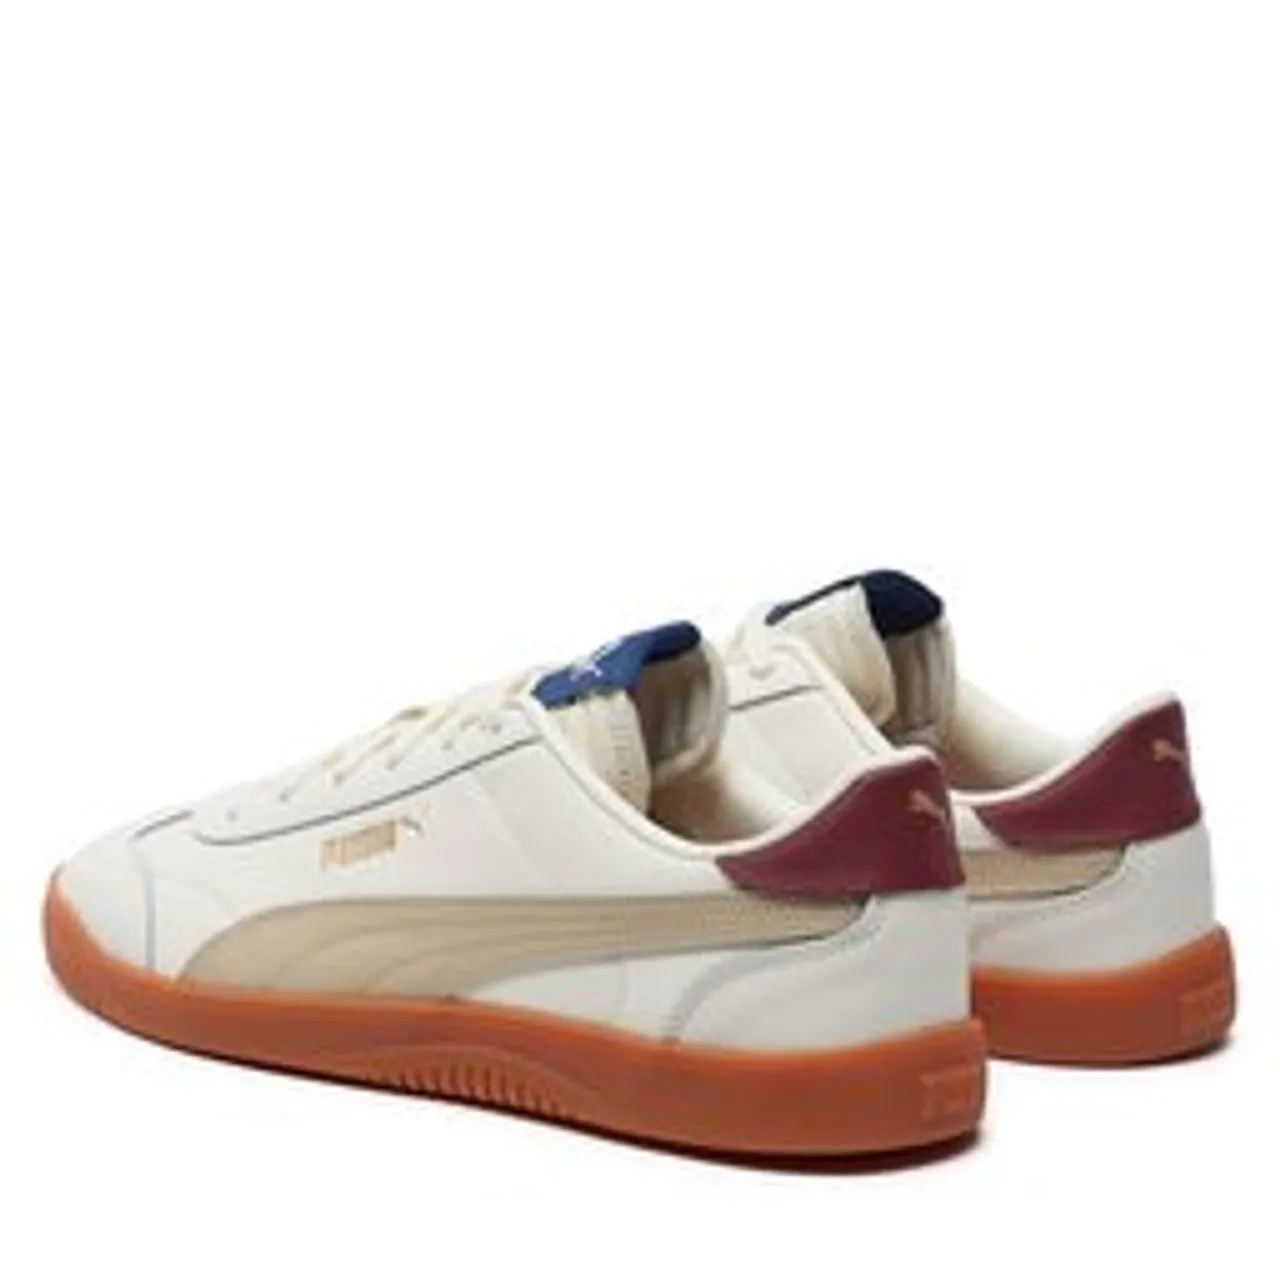 Sneakers Puma Club 5V5 389406-08 Warm White/Putty/Team Regal Red/Clyde Royal